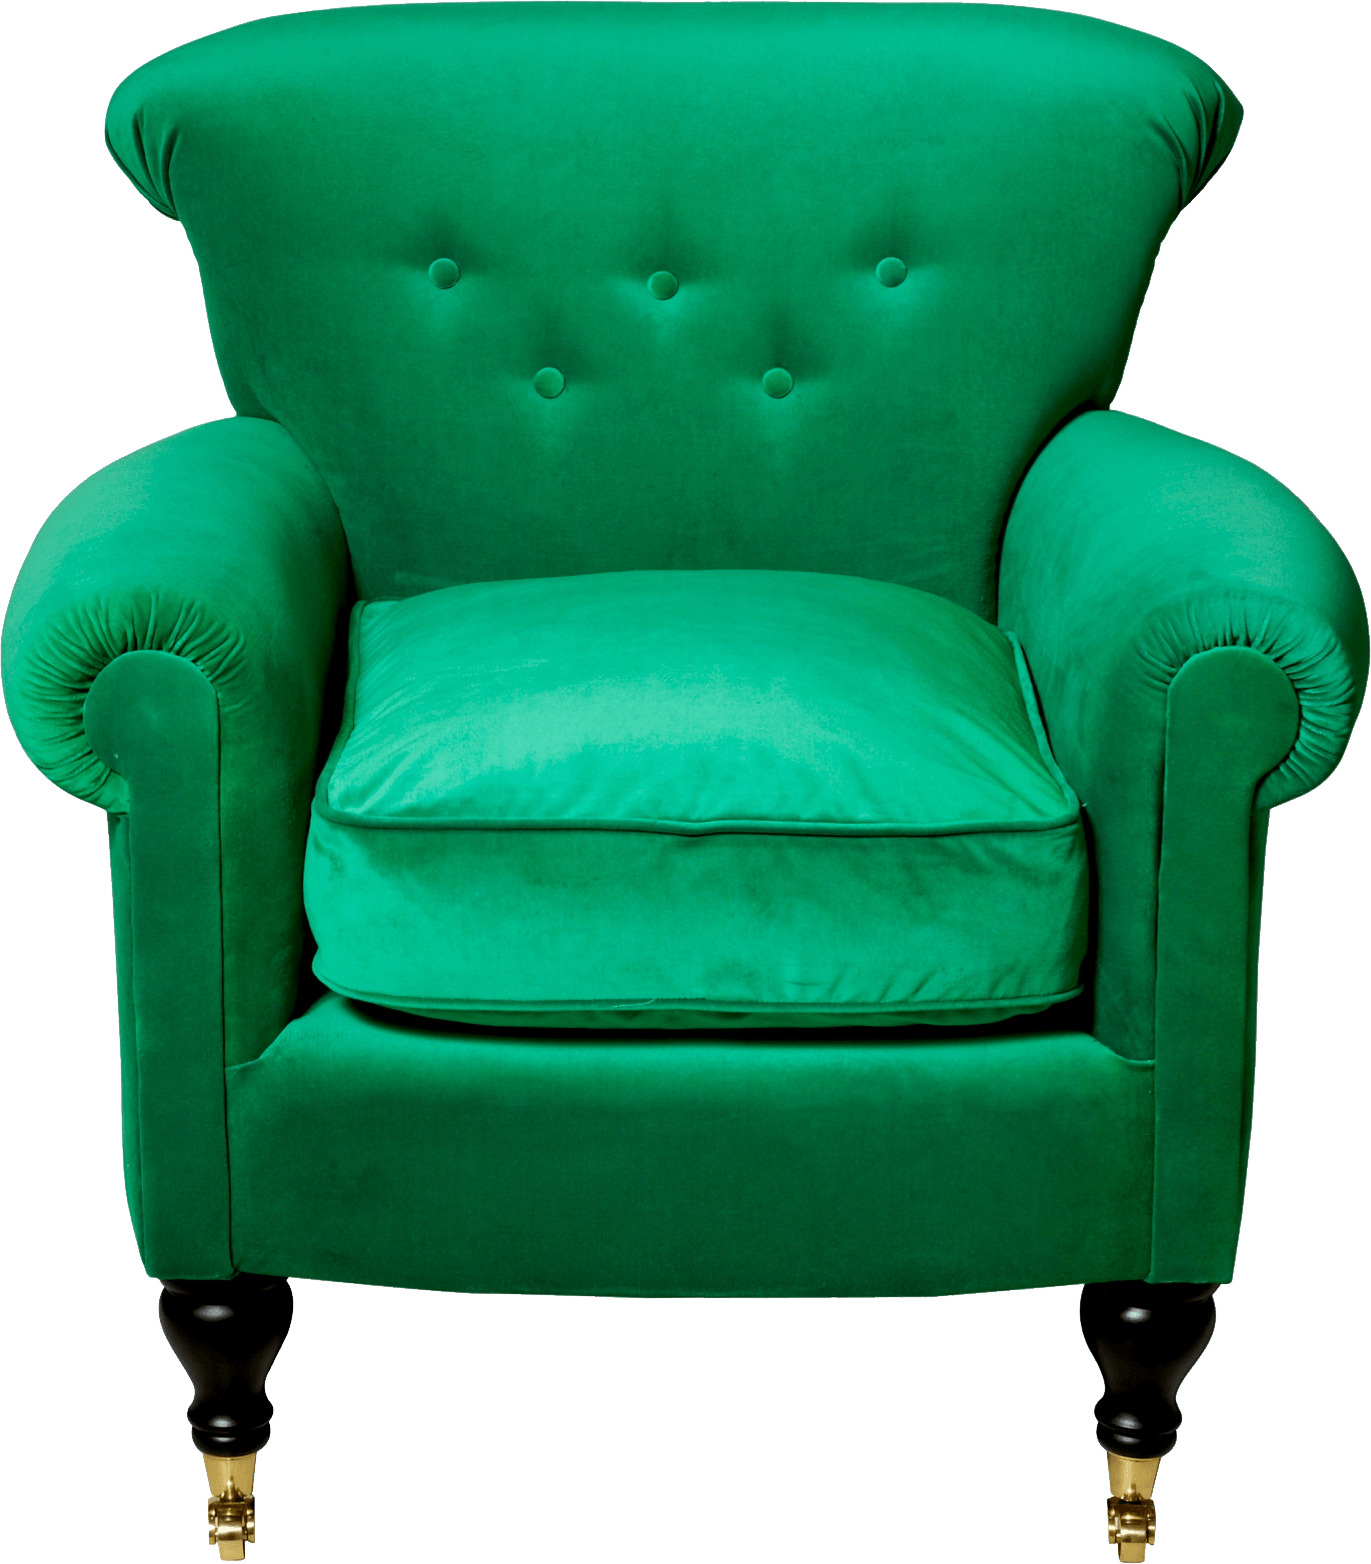 Comfy Green Armchair png icons